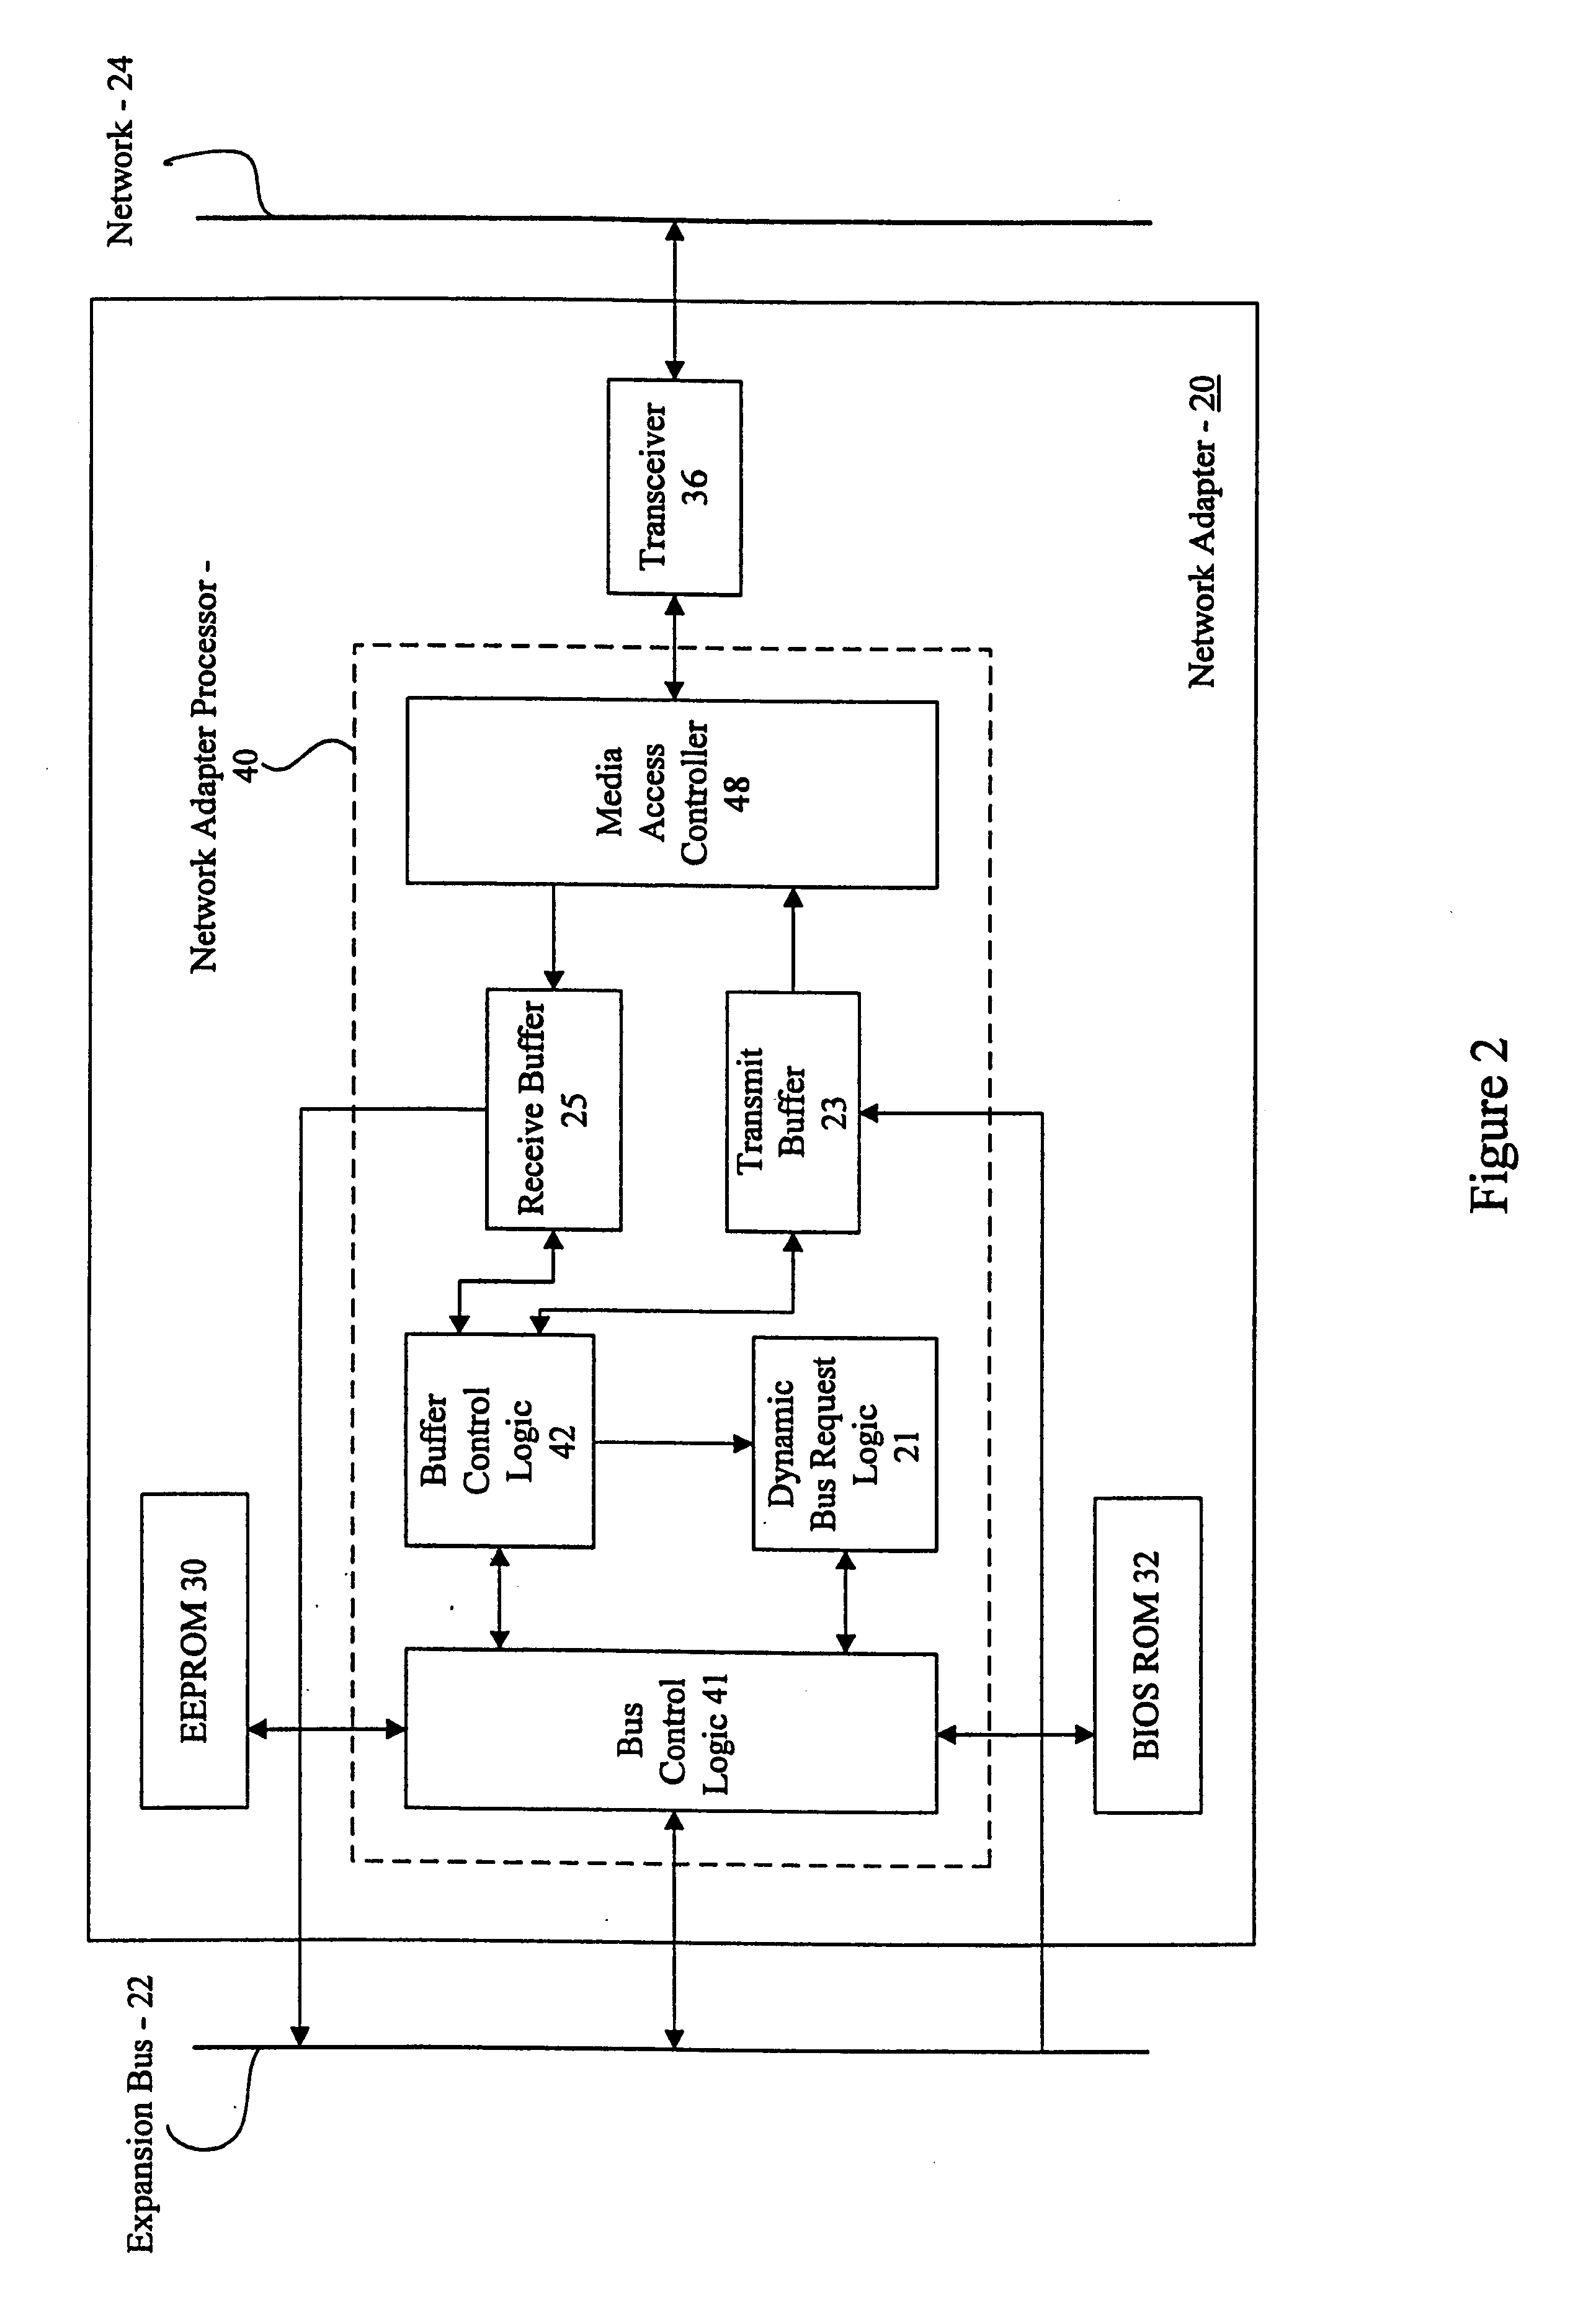 Method and apparatus for dynamic bus request and burst-length control